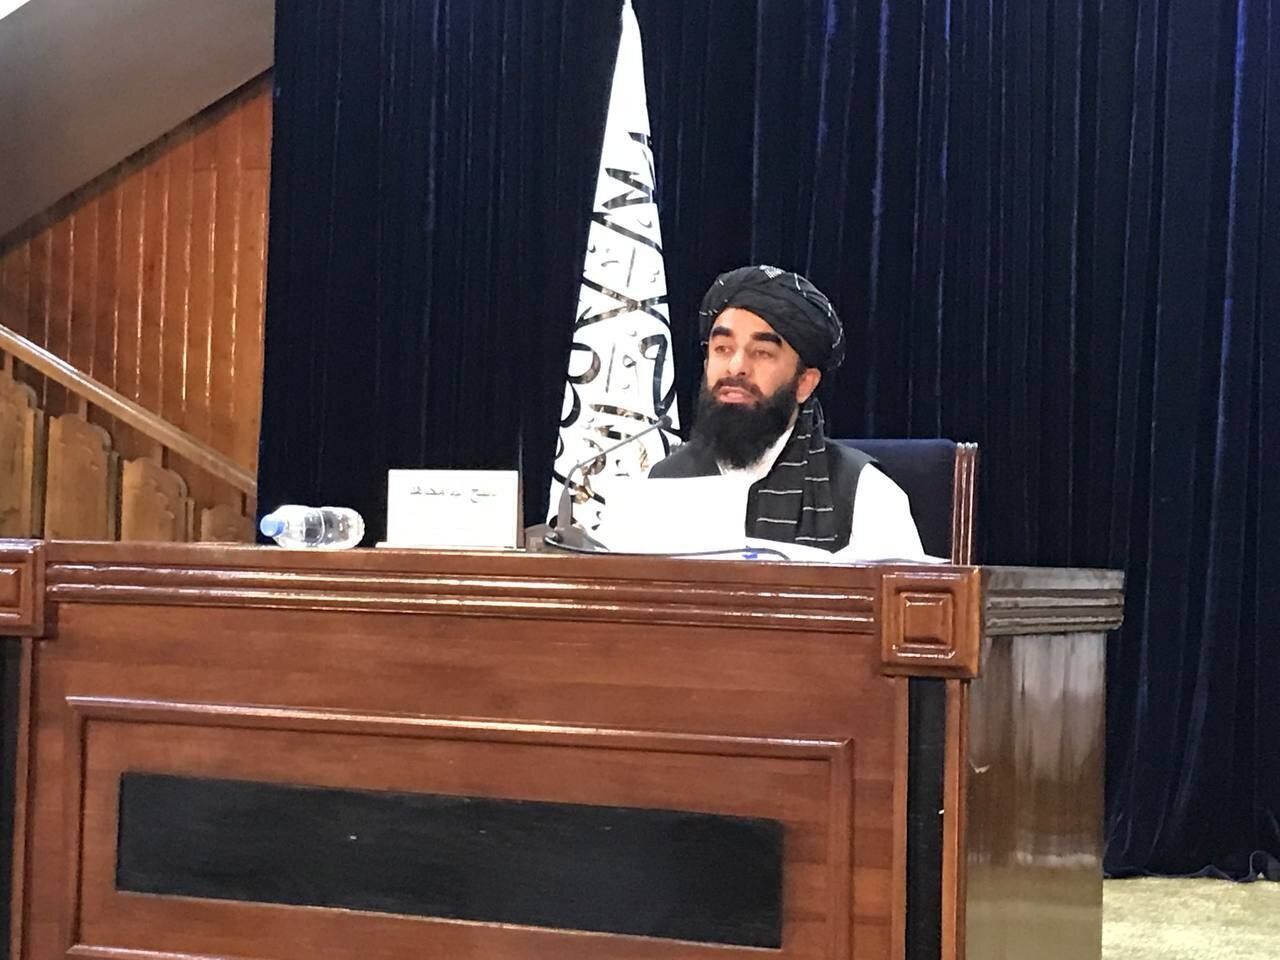 Taliban spokesperson Zabihullah Mujahid holds a press conference in Kabul, Afghanistan on Sept. 7.&nbsp;